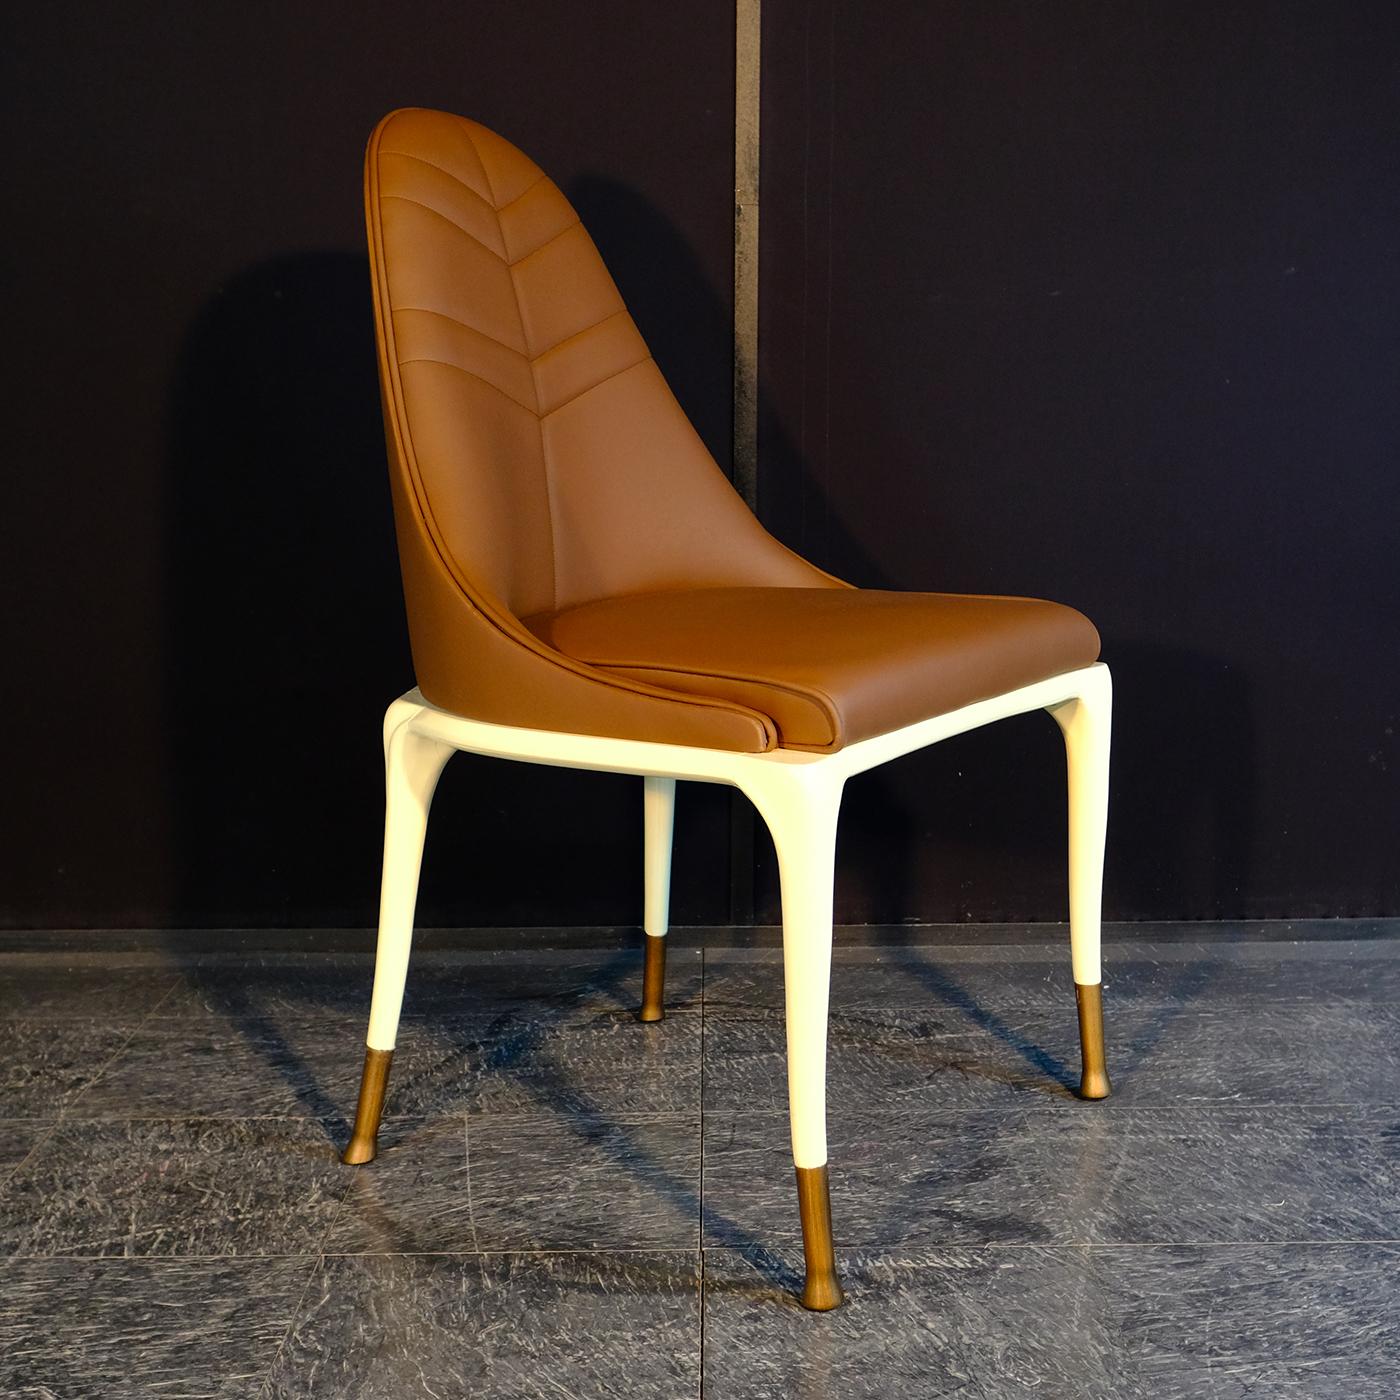 Lyaf chair by Divina Project.